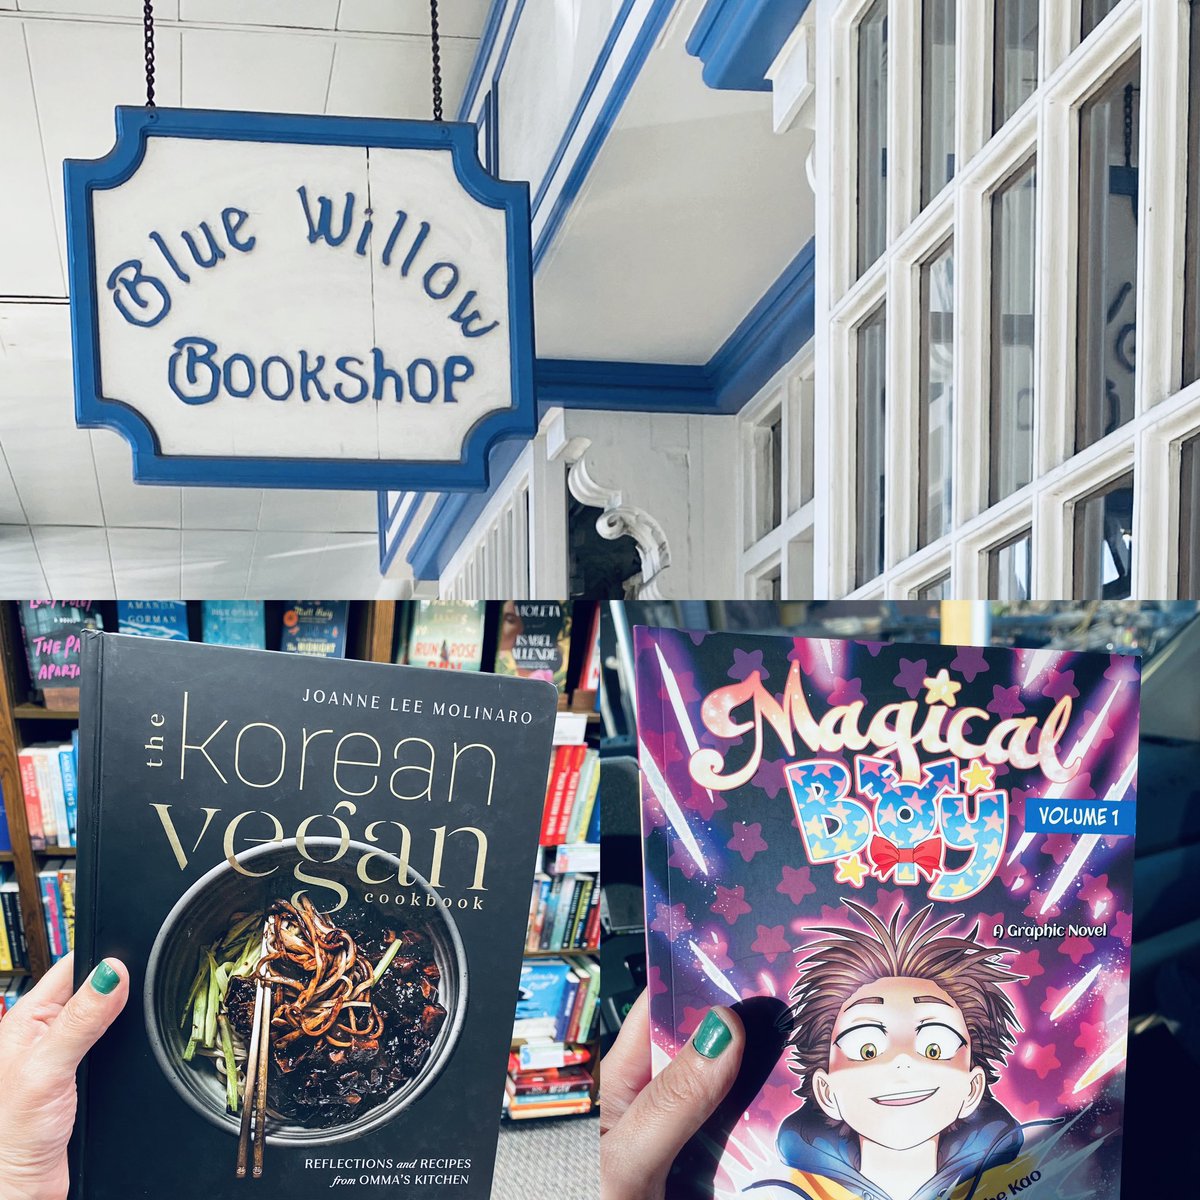 Visited @BlueWillowBooks and picked up a copy of @thekoreanvegan’s beautiful cookbook and @thek40’s Magical Boy graphic novel that looks amazing.
@ZibbyBooks #22in22 #shopindie